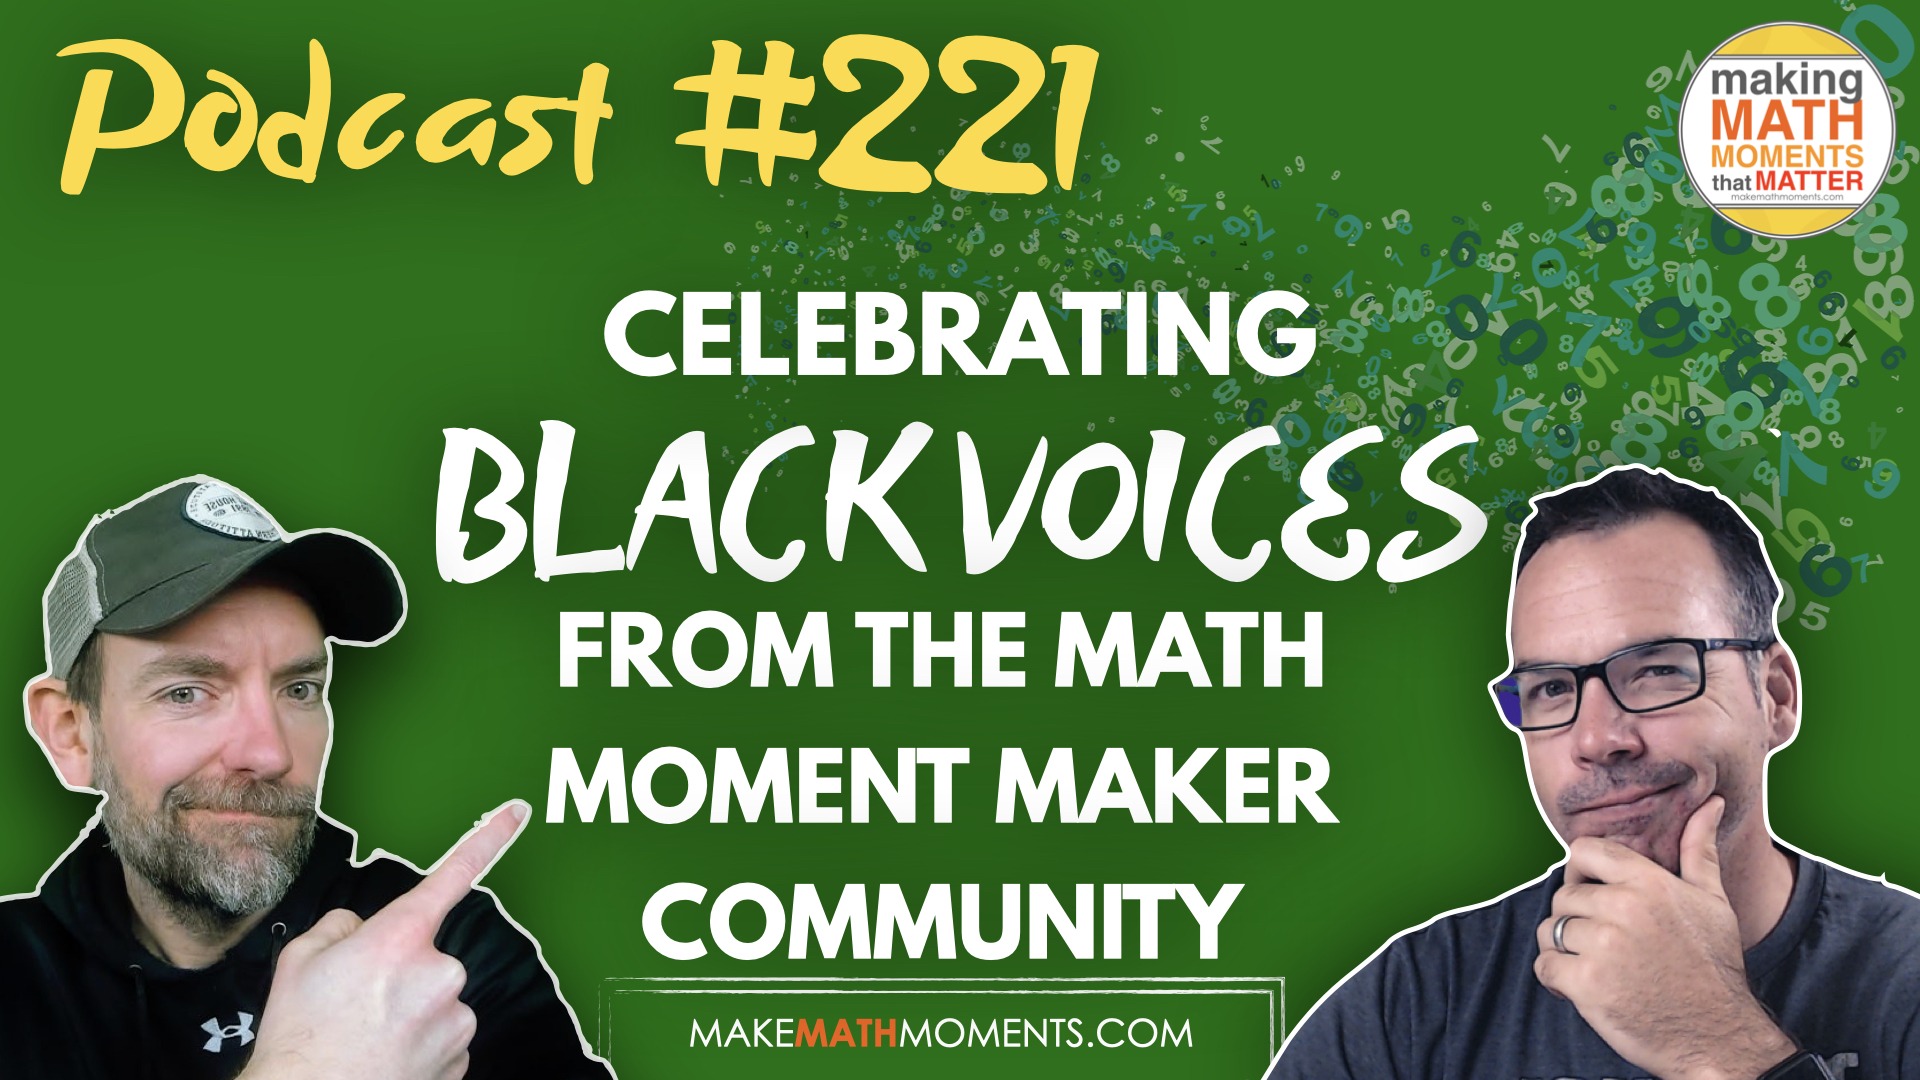 Episode 221: Celebrating Black Voices From The Math Moment Maker Community